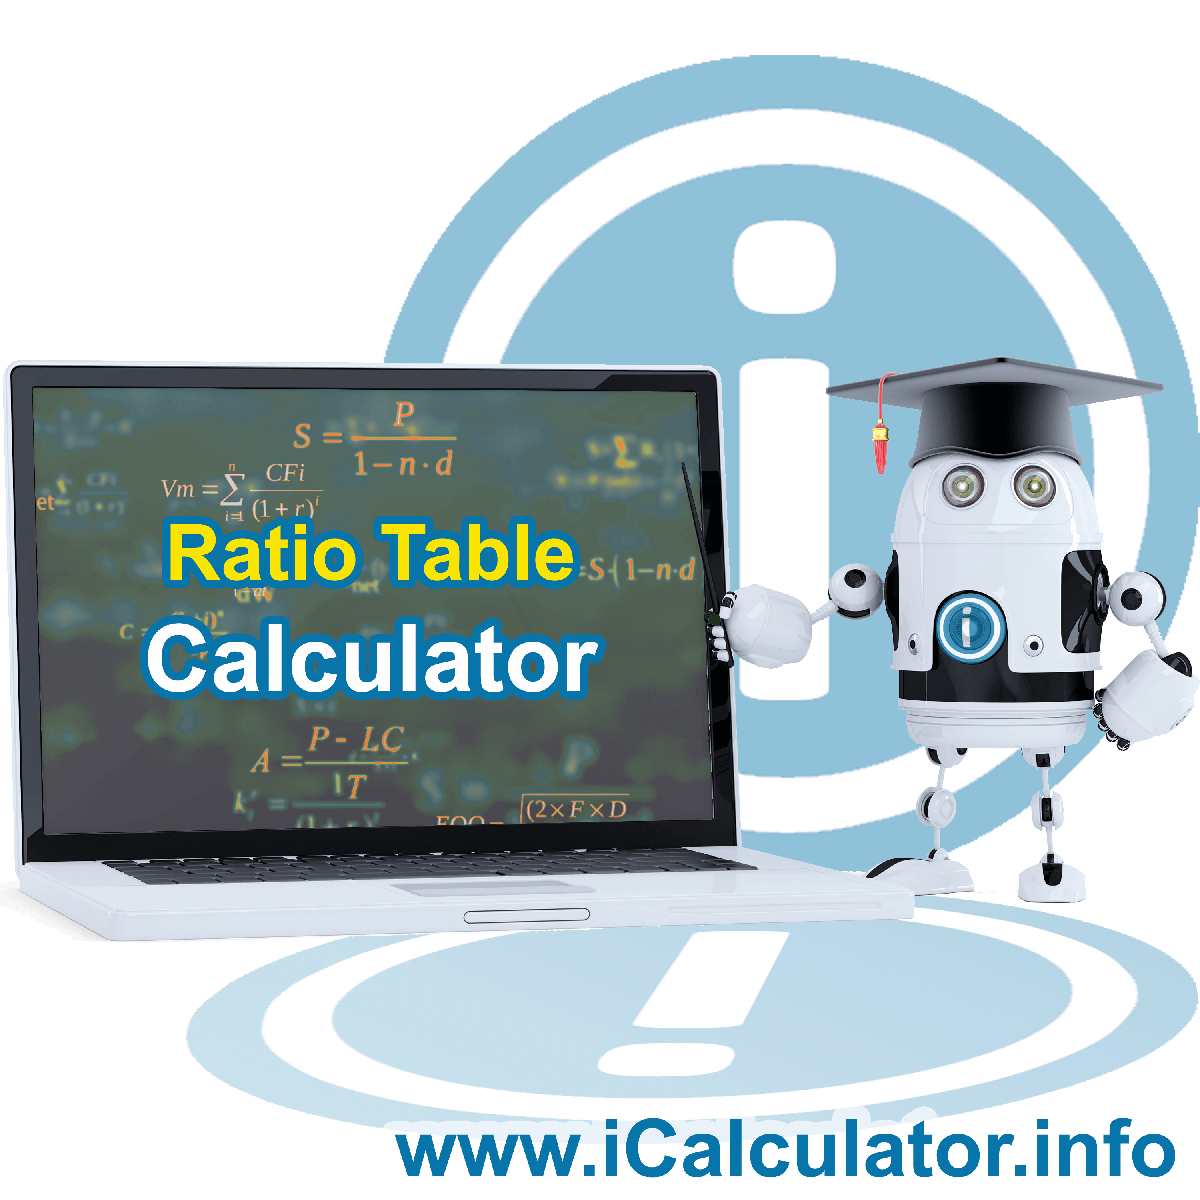 Ratio Table. This image shows the properties and ratio table formula for the Ratio Table